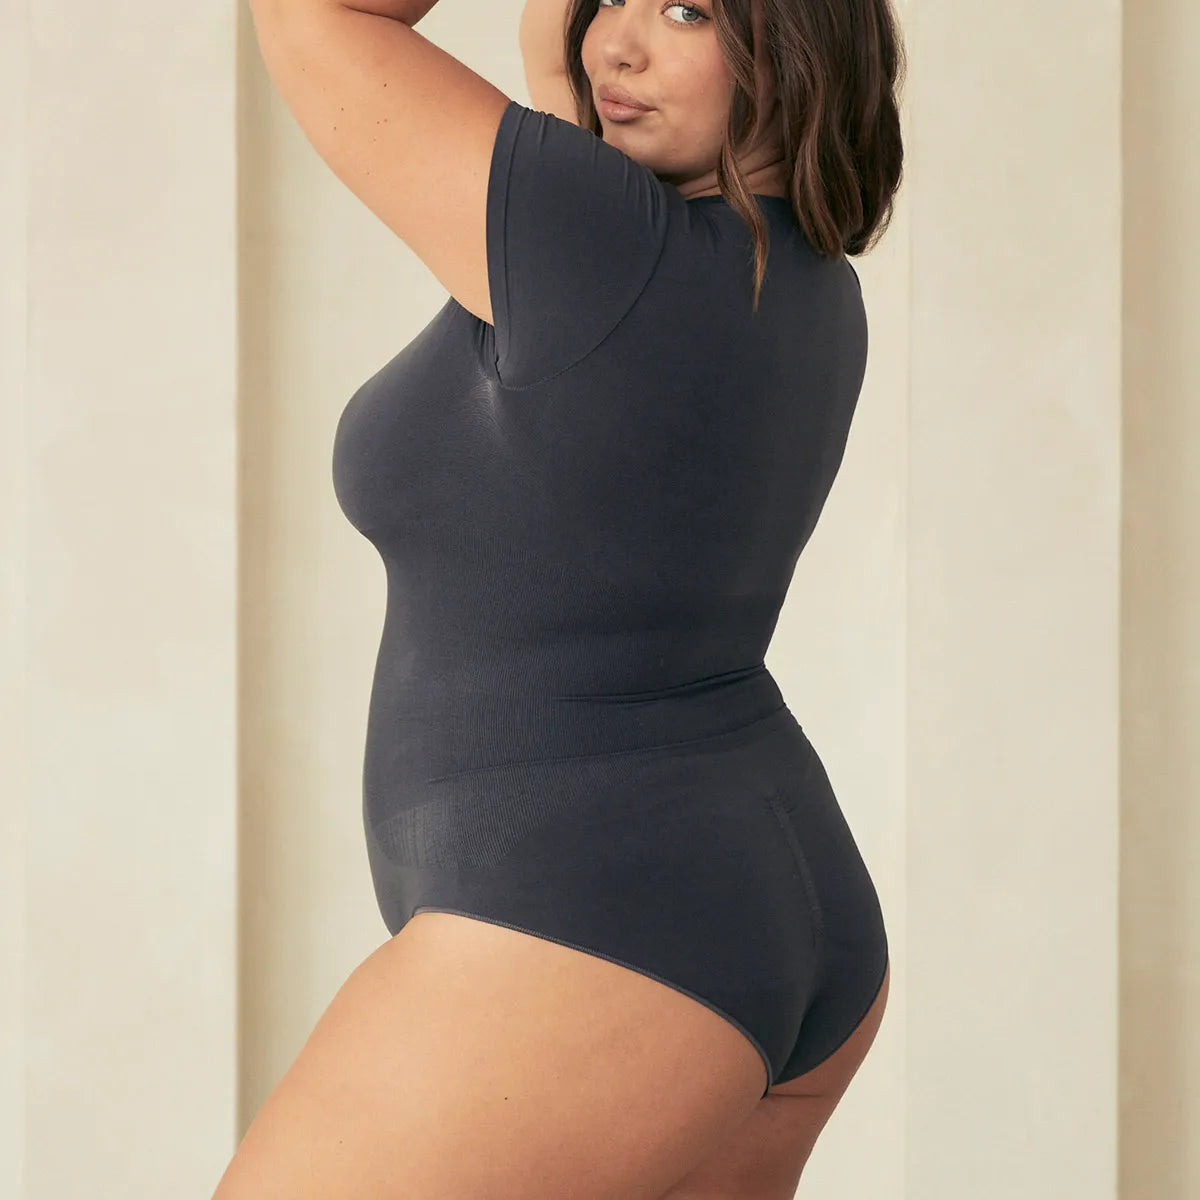 This No. 1 Bestselling Shapewear Bodysuit Has Over 14K